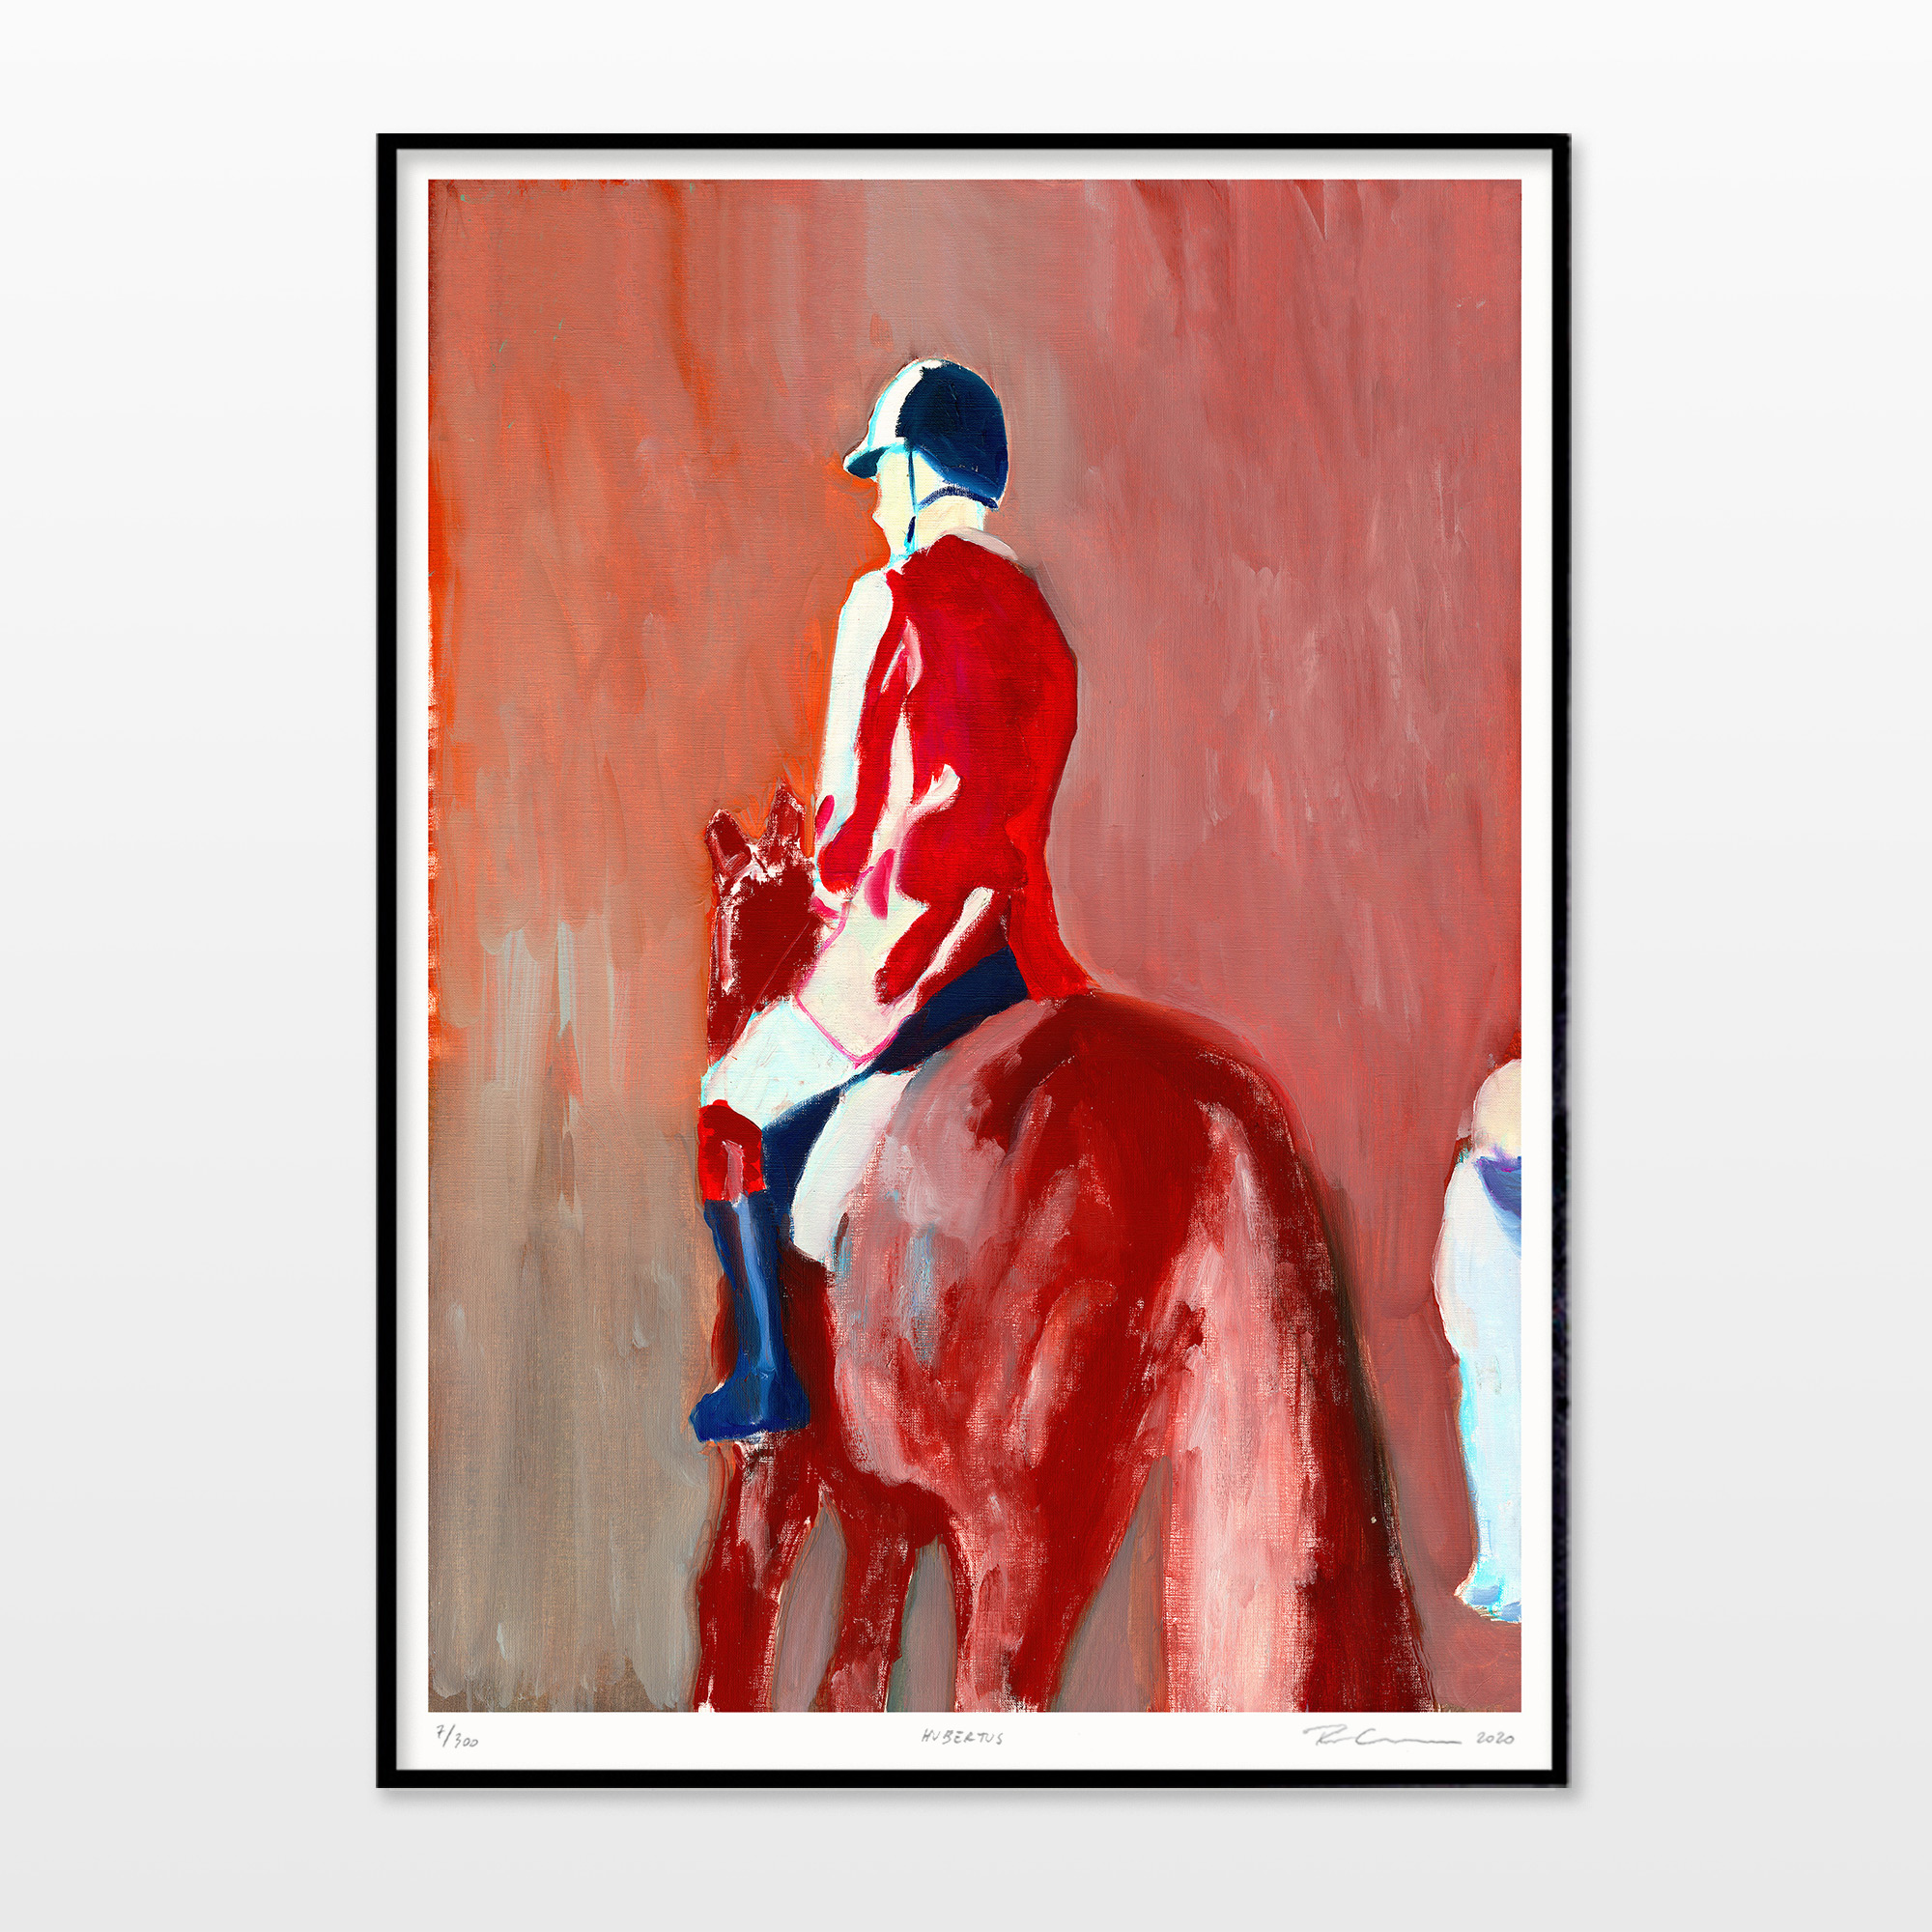 posters-prints, giclee-print, aesthetic, colorful, figurative, illustrative, landscape, animals, movement, nature, people, transportation, brown, red, ink, paper, beautiful, contemporary-art, decorative, design, forest, horses, interior, interior-design, modern, modern-art, naturalism, posters, prints, Buy original high quality art. Paintings, drawings, limited edition prints & posters by talented artists.